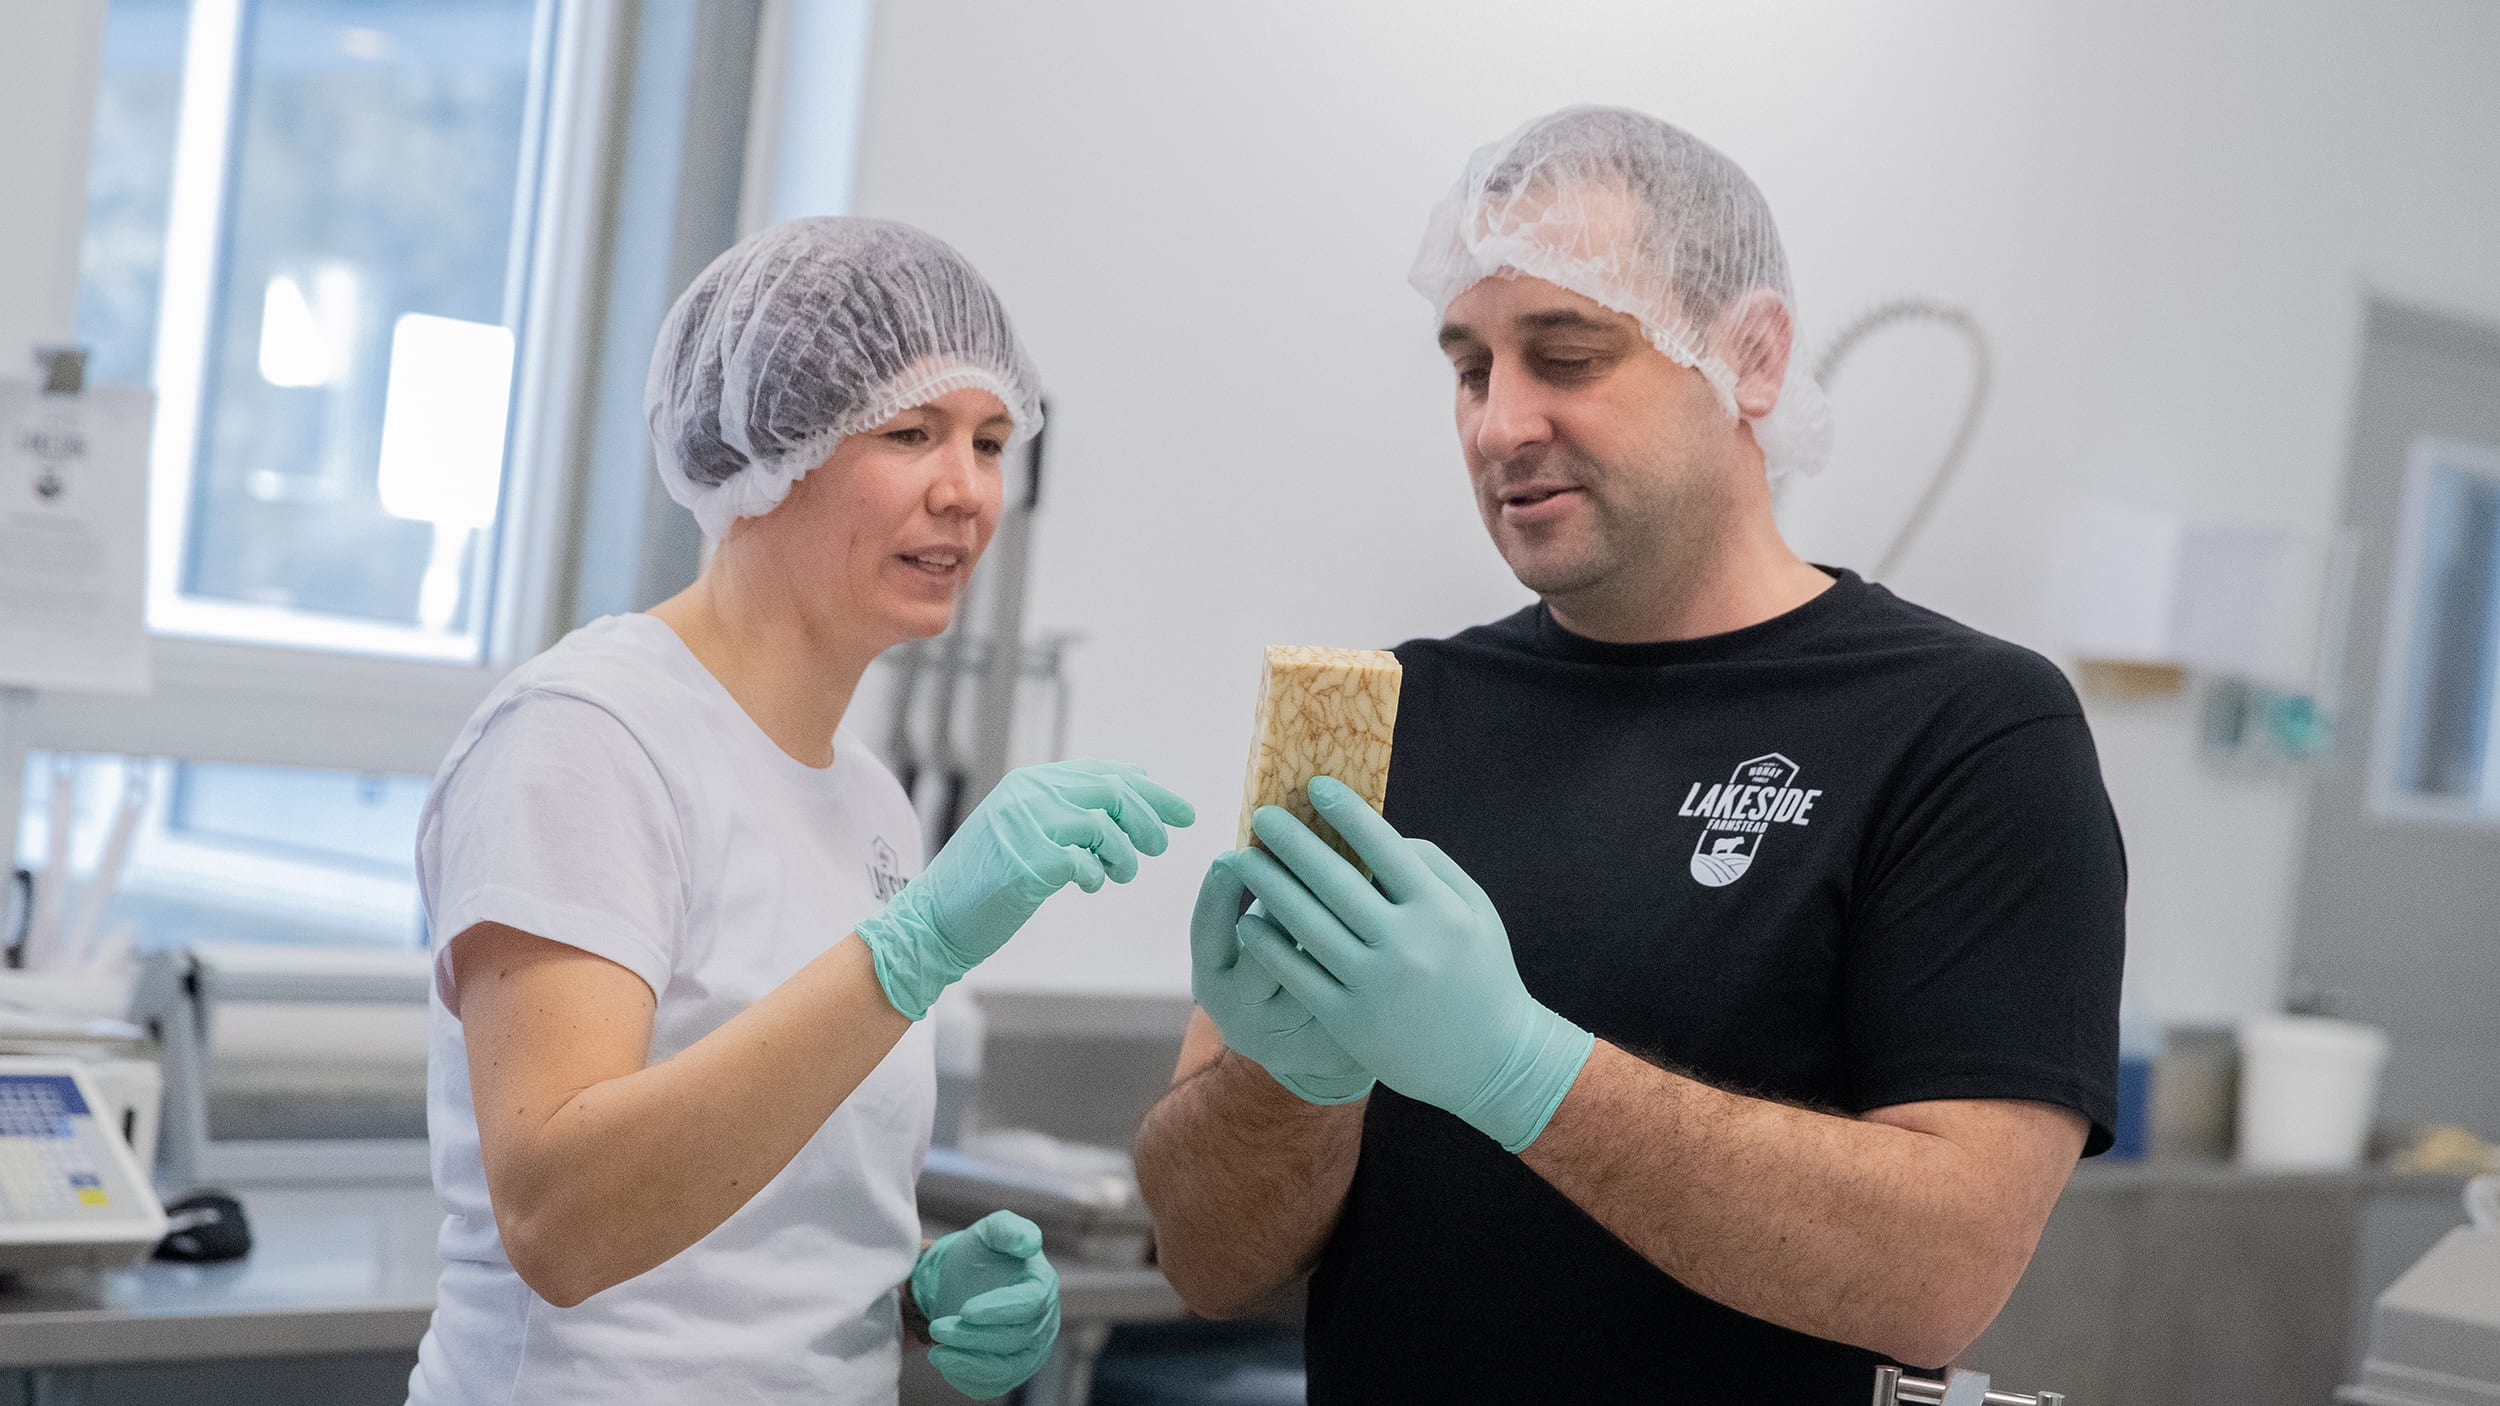 Jeff Nonay standing beside woman wearing hair nets holding block of cheese